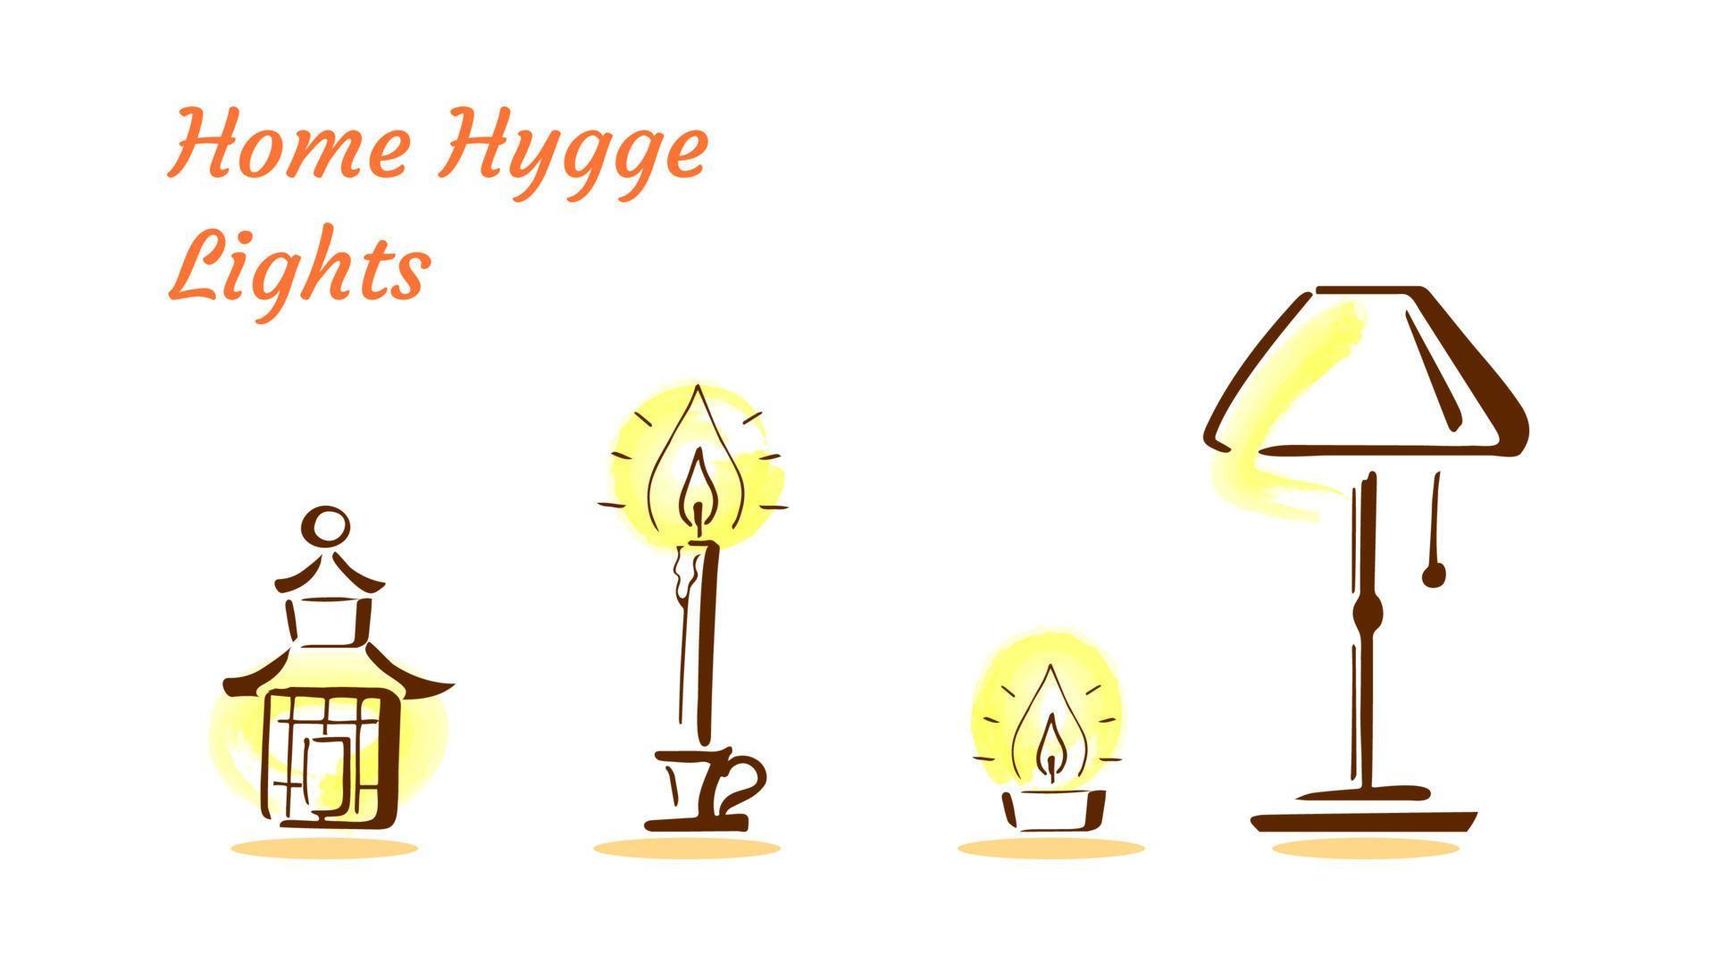 Home hygge, cosy interior objects, lights for relax mood. Hand-drawn brush doodles of lantern, tealight, candle, lamp vector